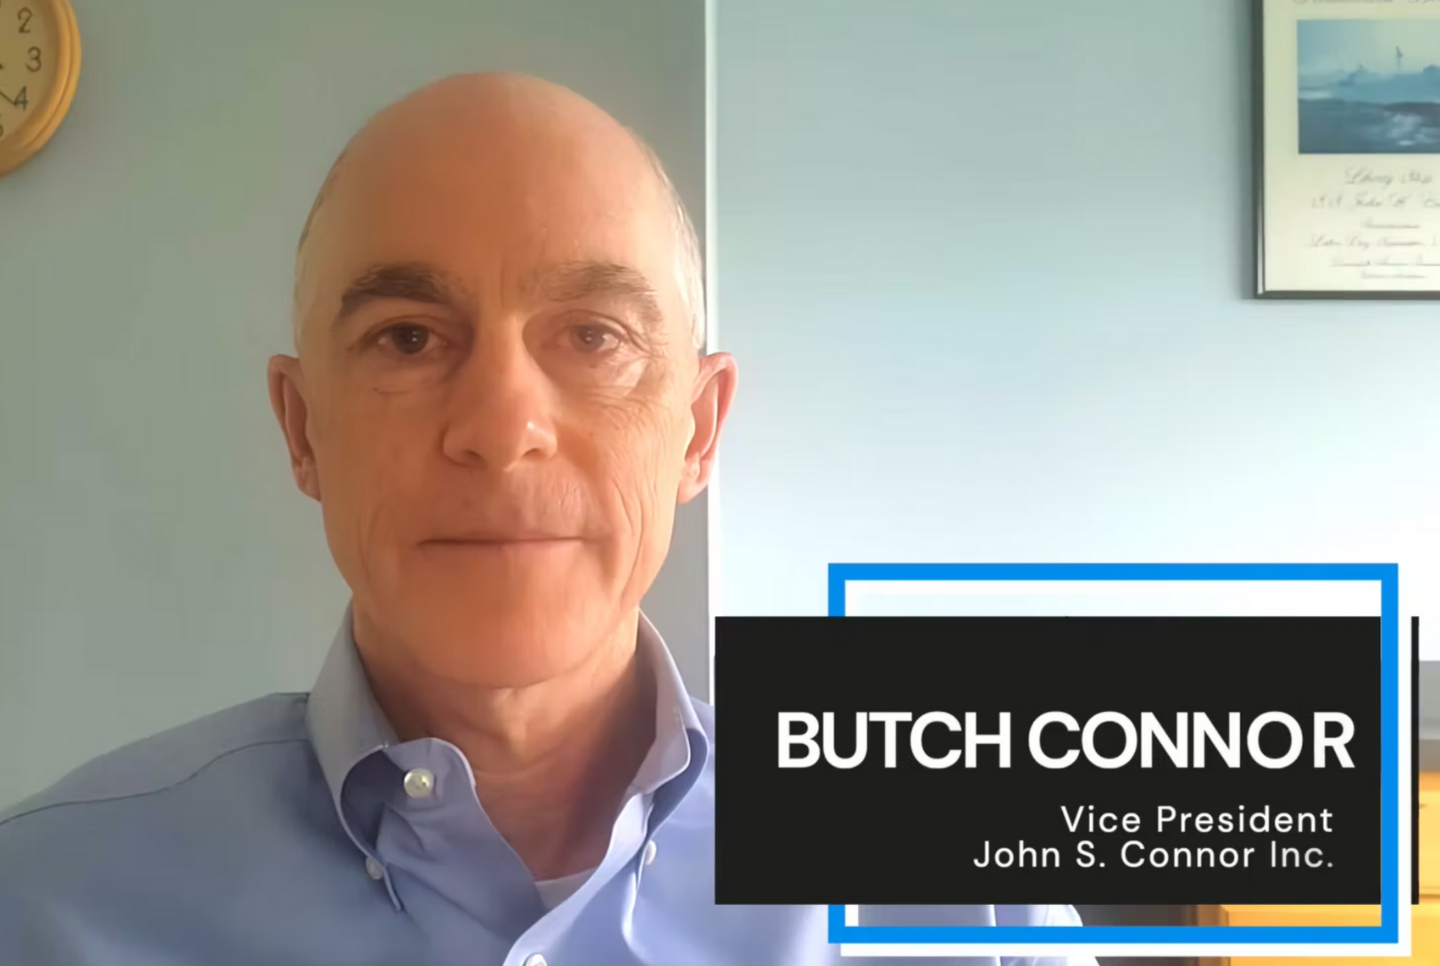 Learn why John S. Conner sees a strong future supported by Chain.io.